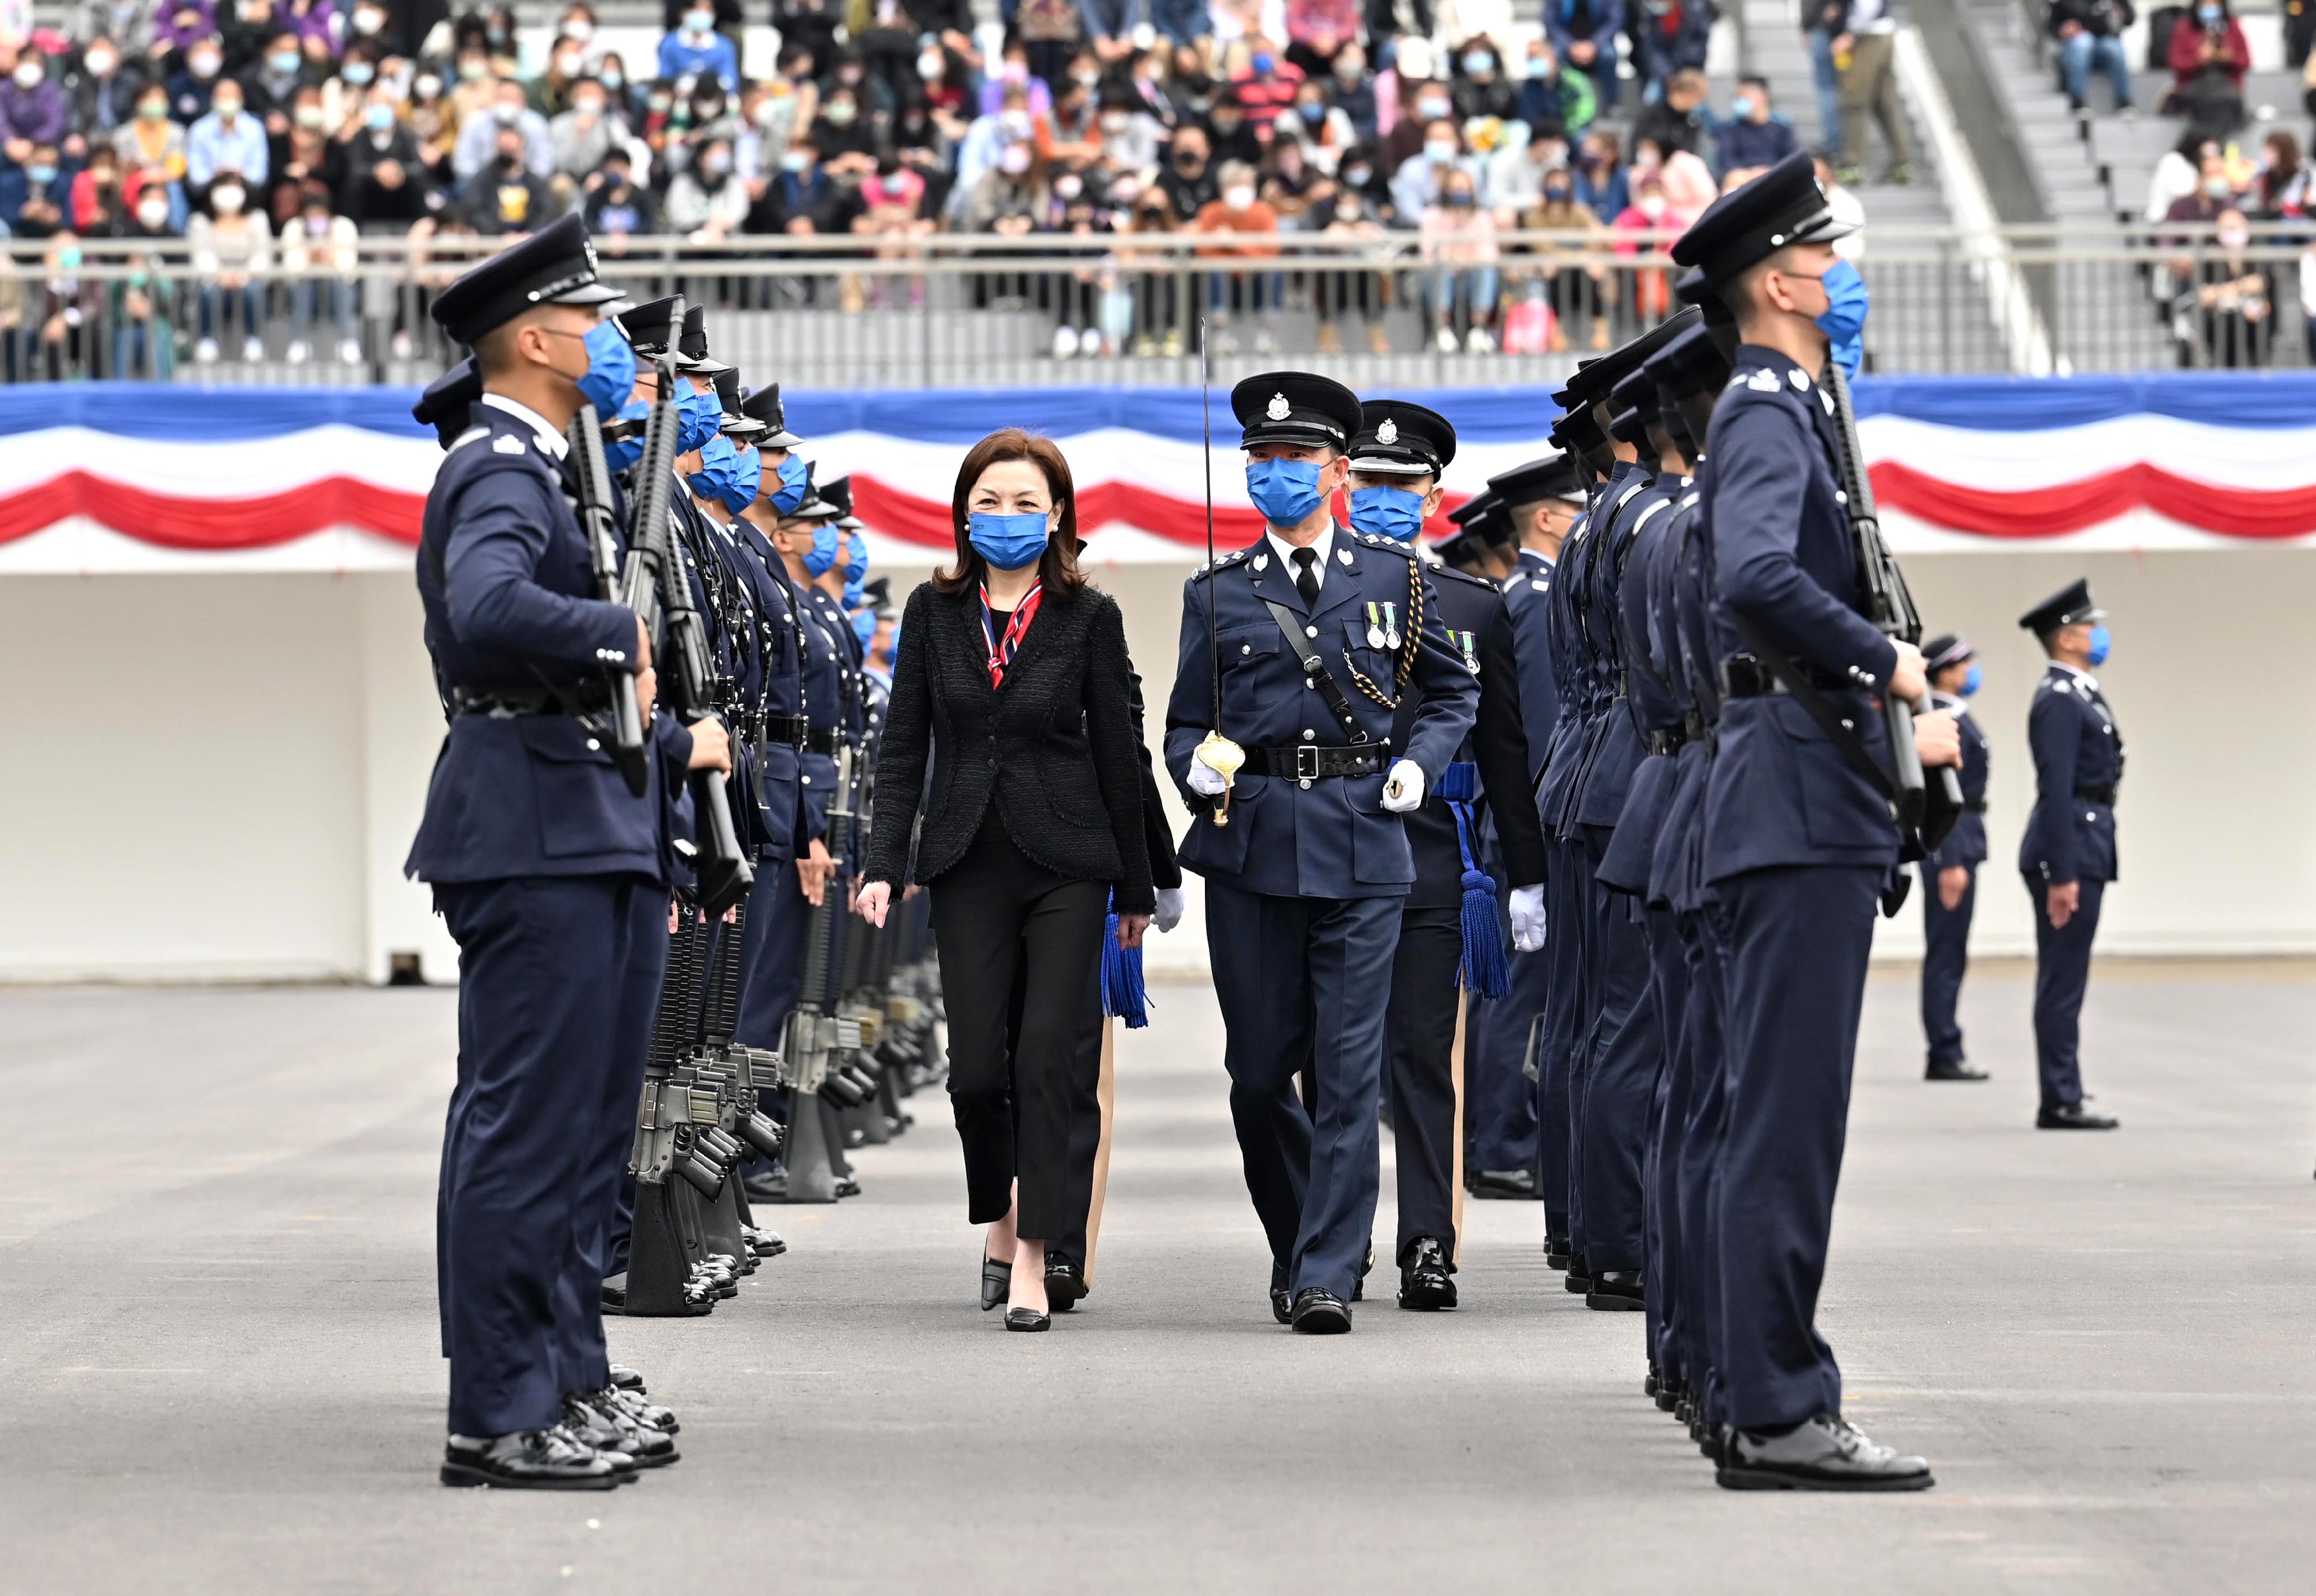 The Chairman of the Independent Police Complaints Council, Ms Priscilla Wong Pui-sze, inspects a passing-out parade as a reviewing officer at the Hong Kong Police College today (February 11).